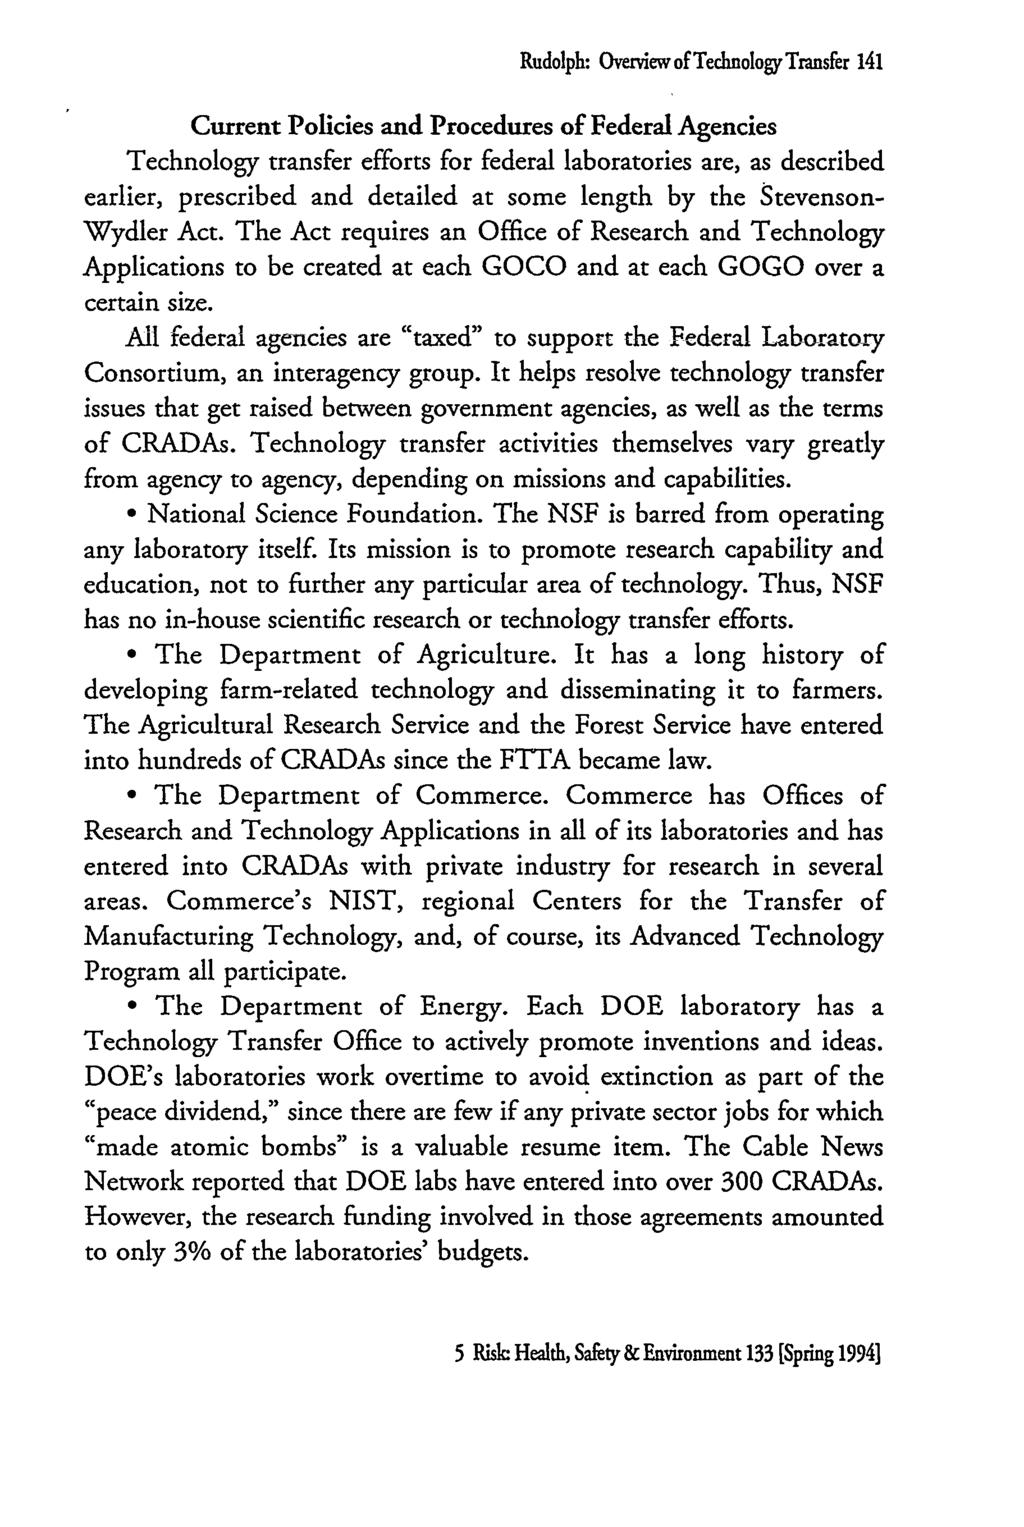 Rudolph: Overview oftechnology Transfer 141 Current Policies and Procedures of Federal Agencies Technology transfer efforts for federal laboratories are, as described earlier, prescribed and detailed